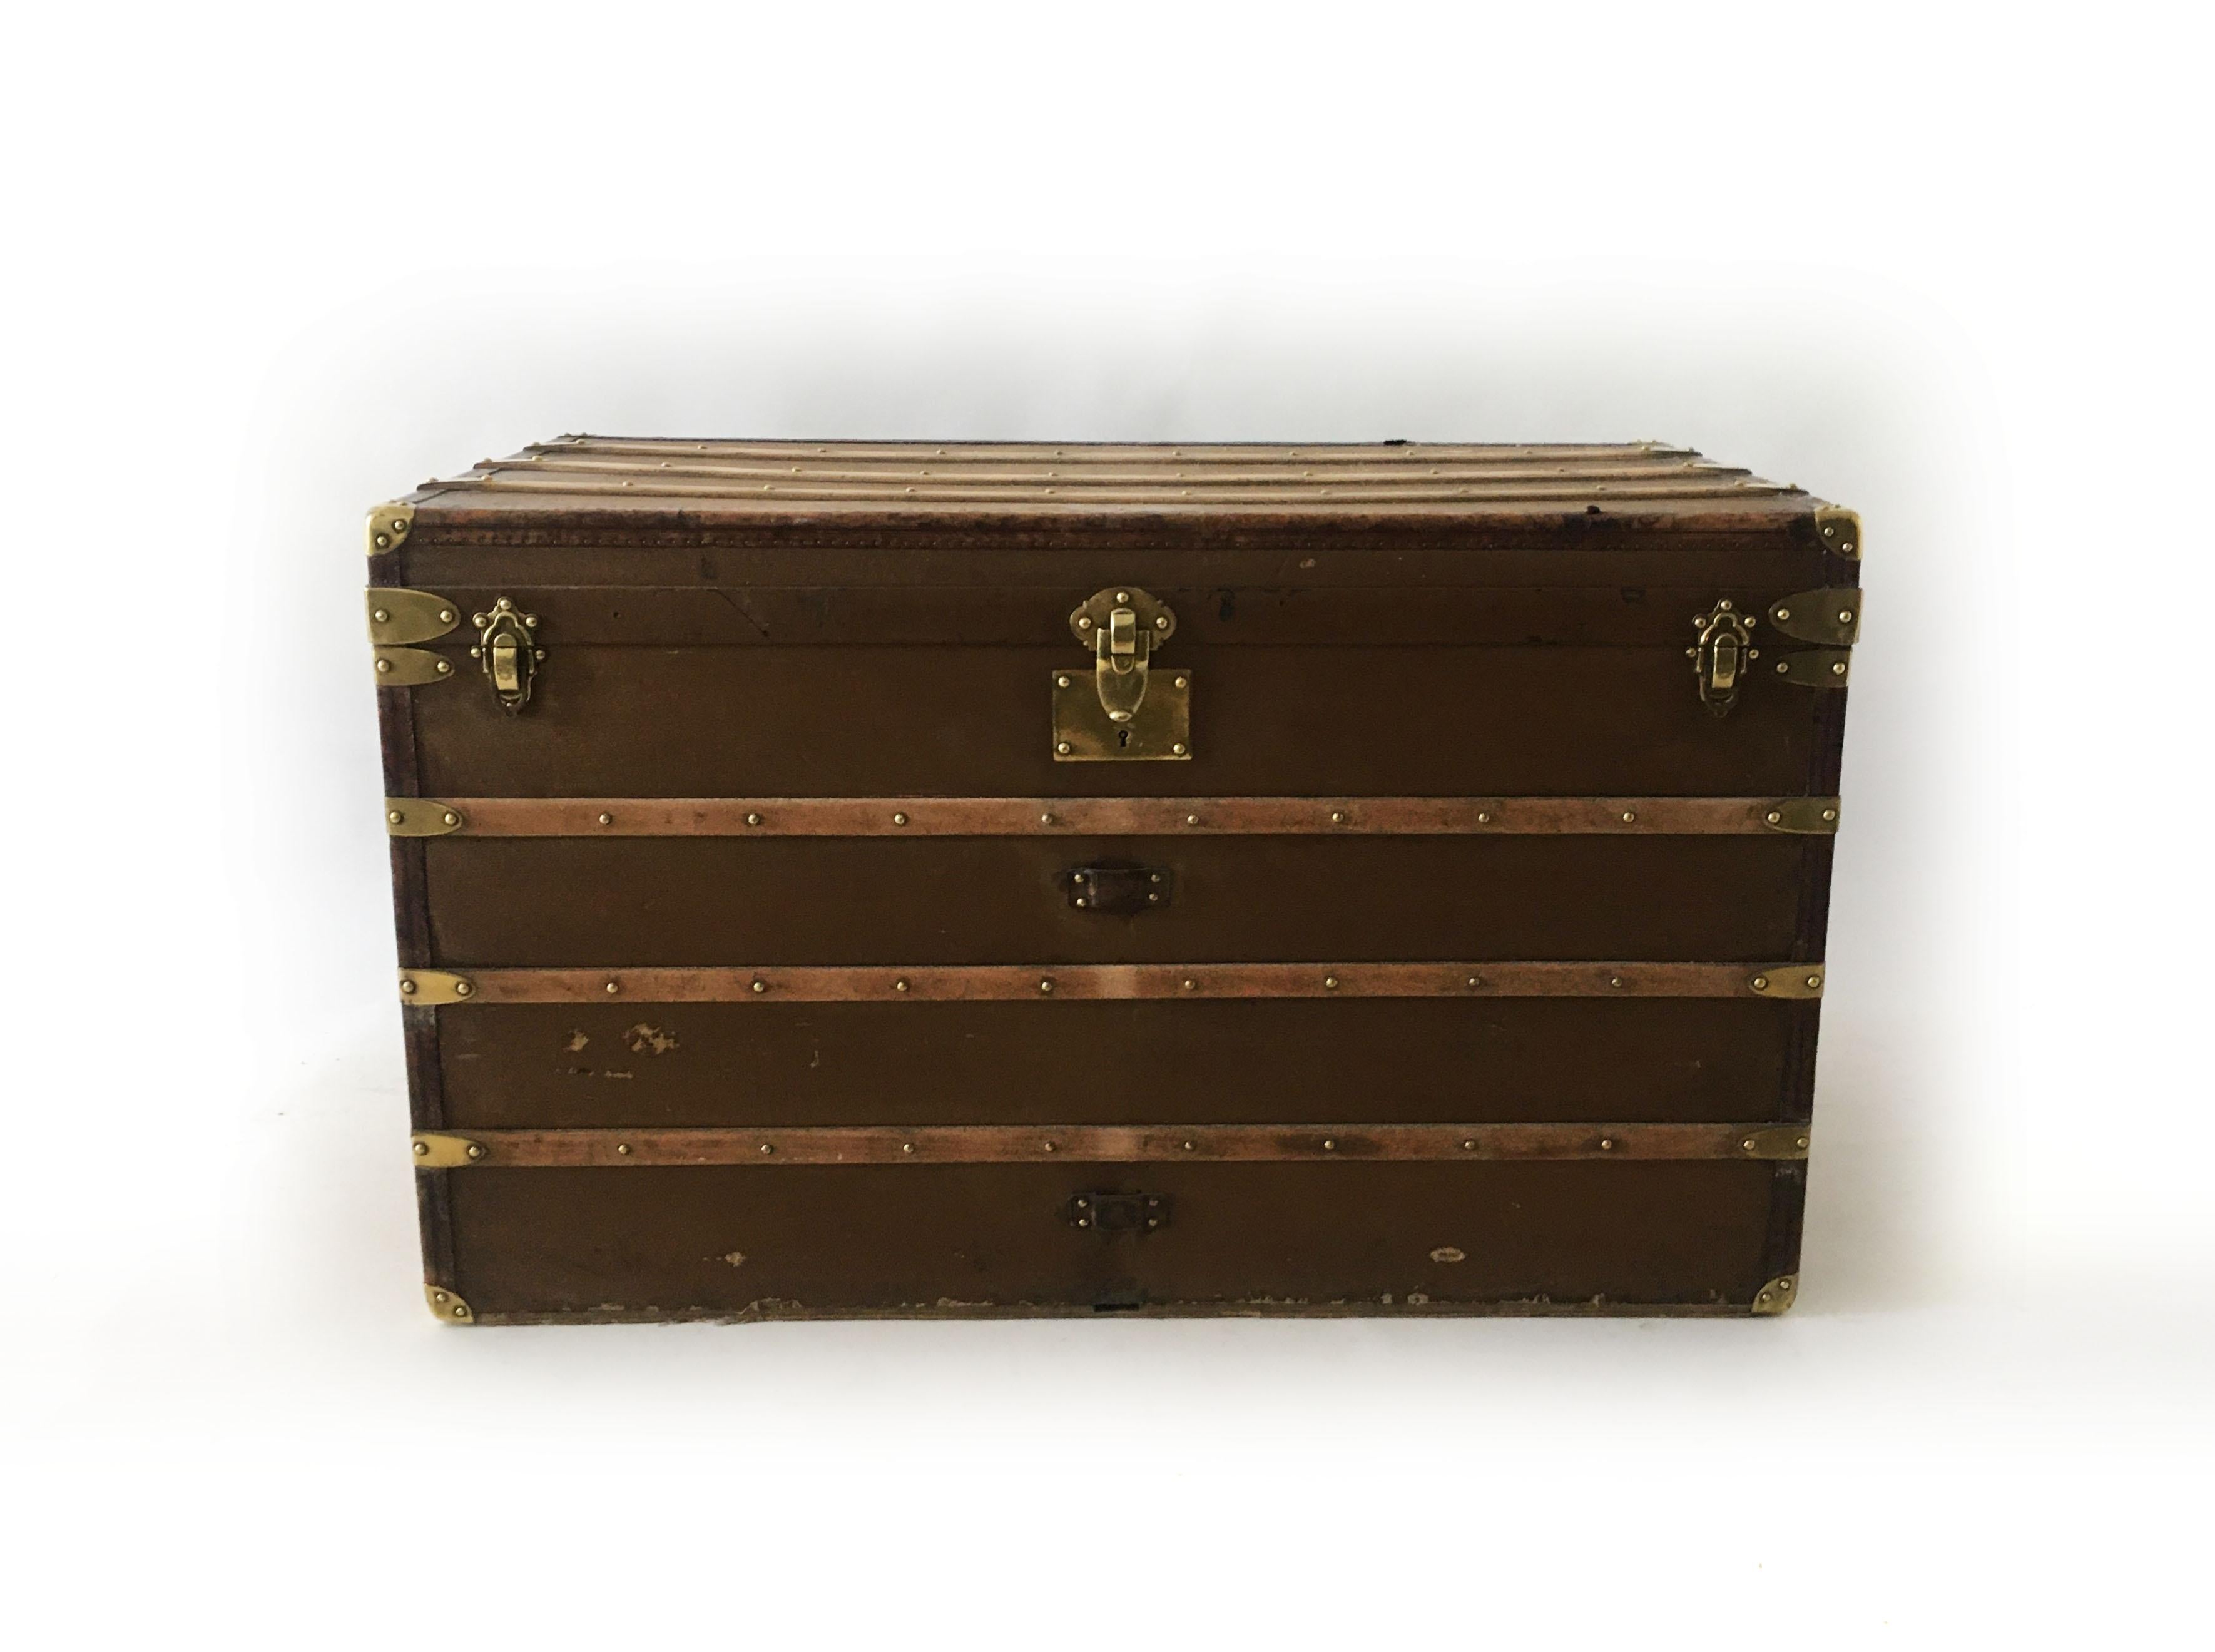 Au Départ is the French historical trunk maker that began its life in the early 19th century. Au Départ is considered as one of four greatest French trunk-makers alongside Louis Vuitton, Goyard and Moynat. Years passed by and Au Départ fulfilled the